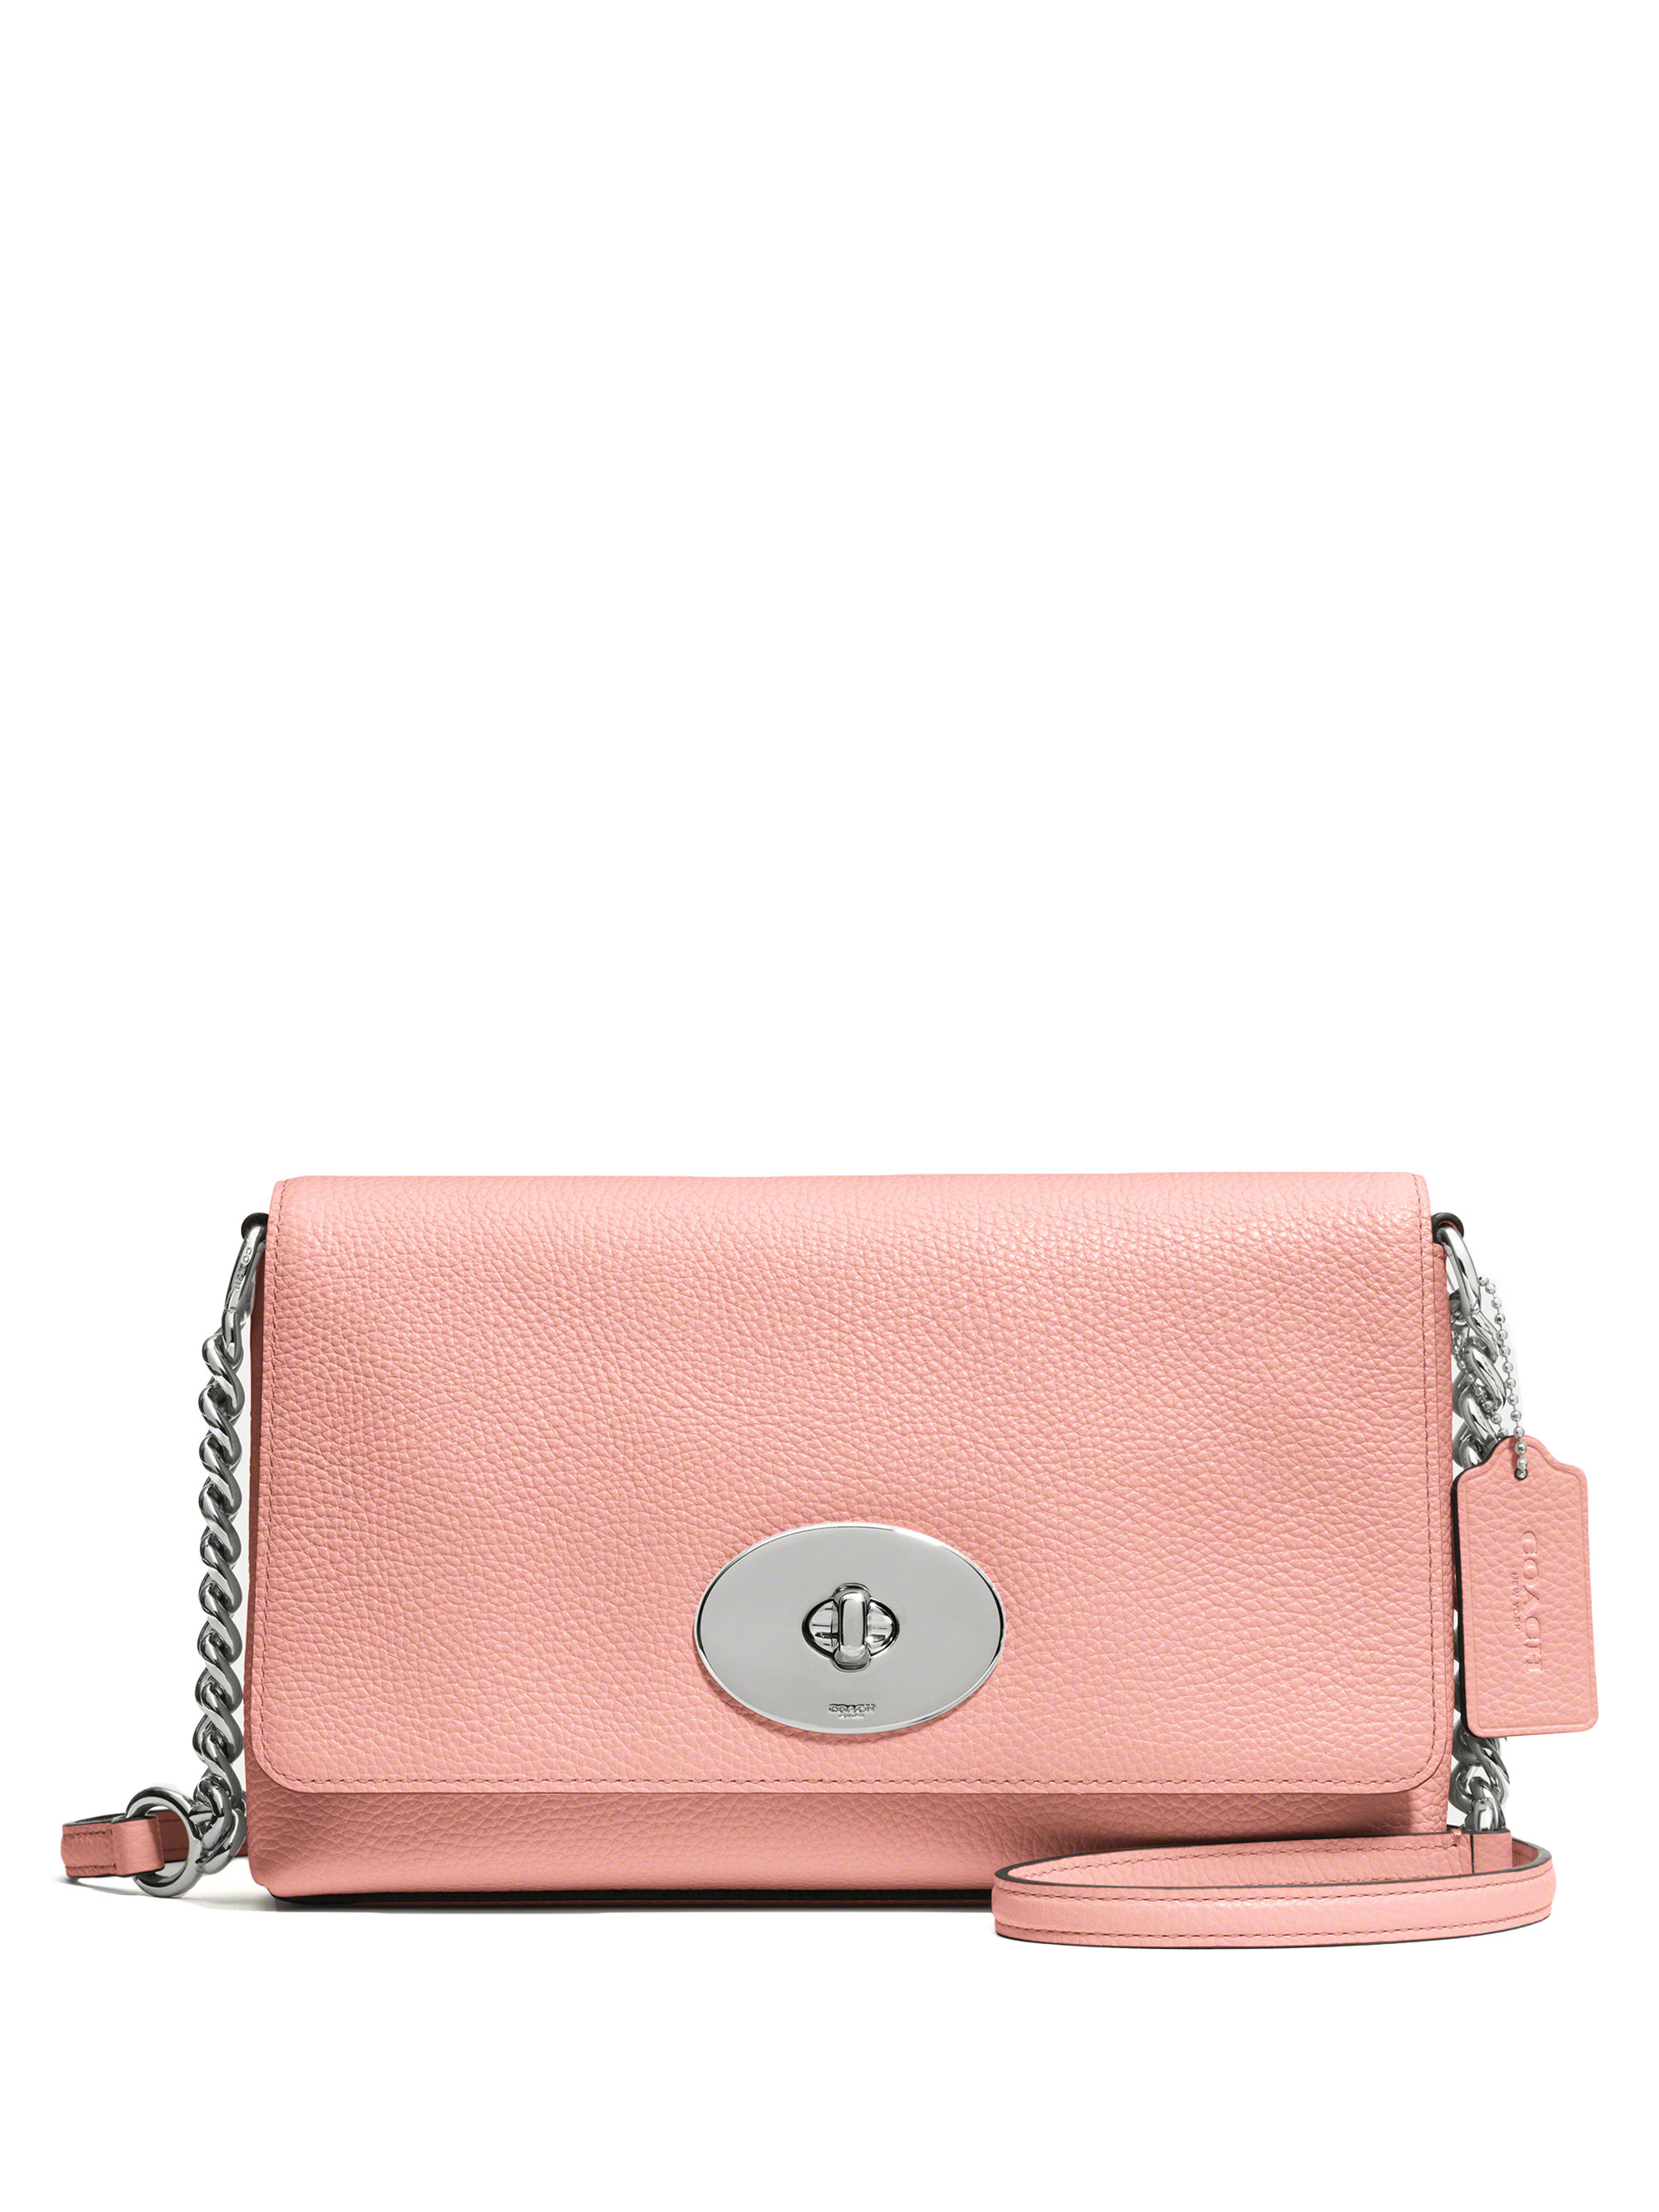 Lyst - Coach Crosstown Pebbled Leather Crossbody Bag in Pink